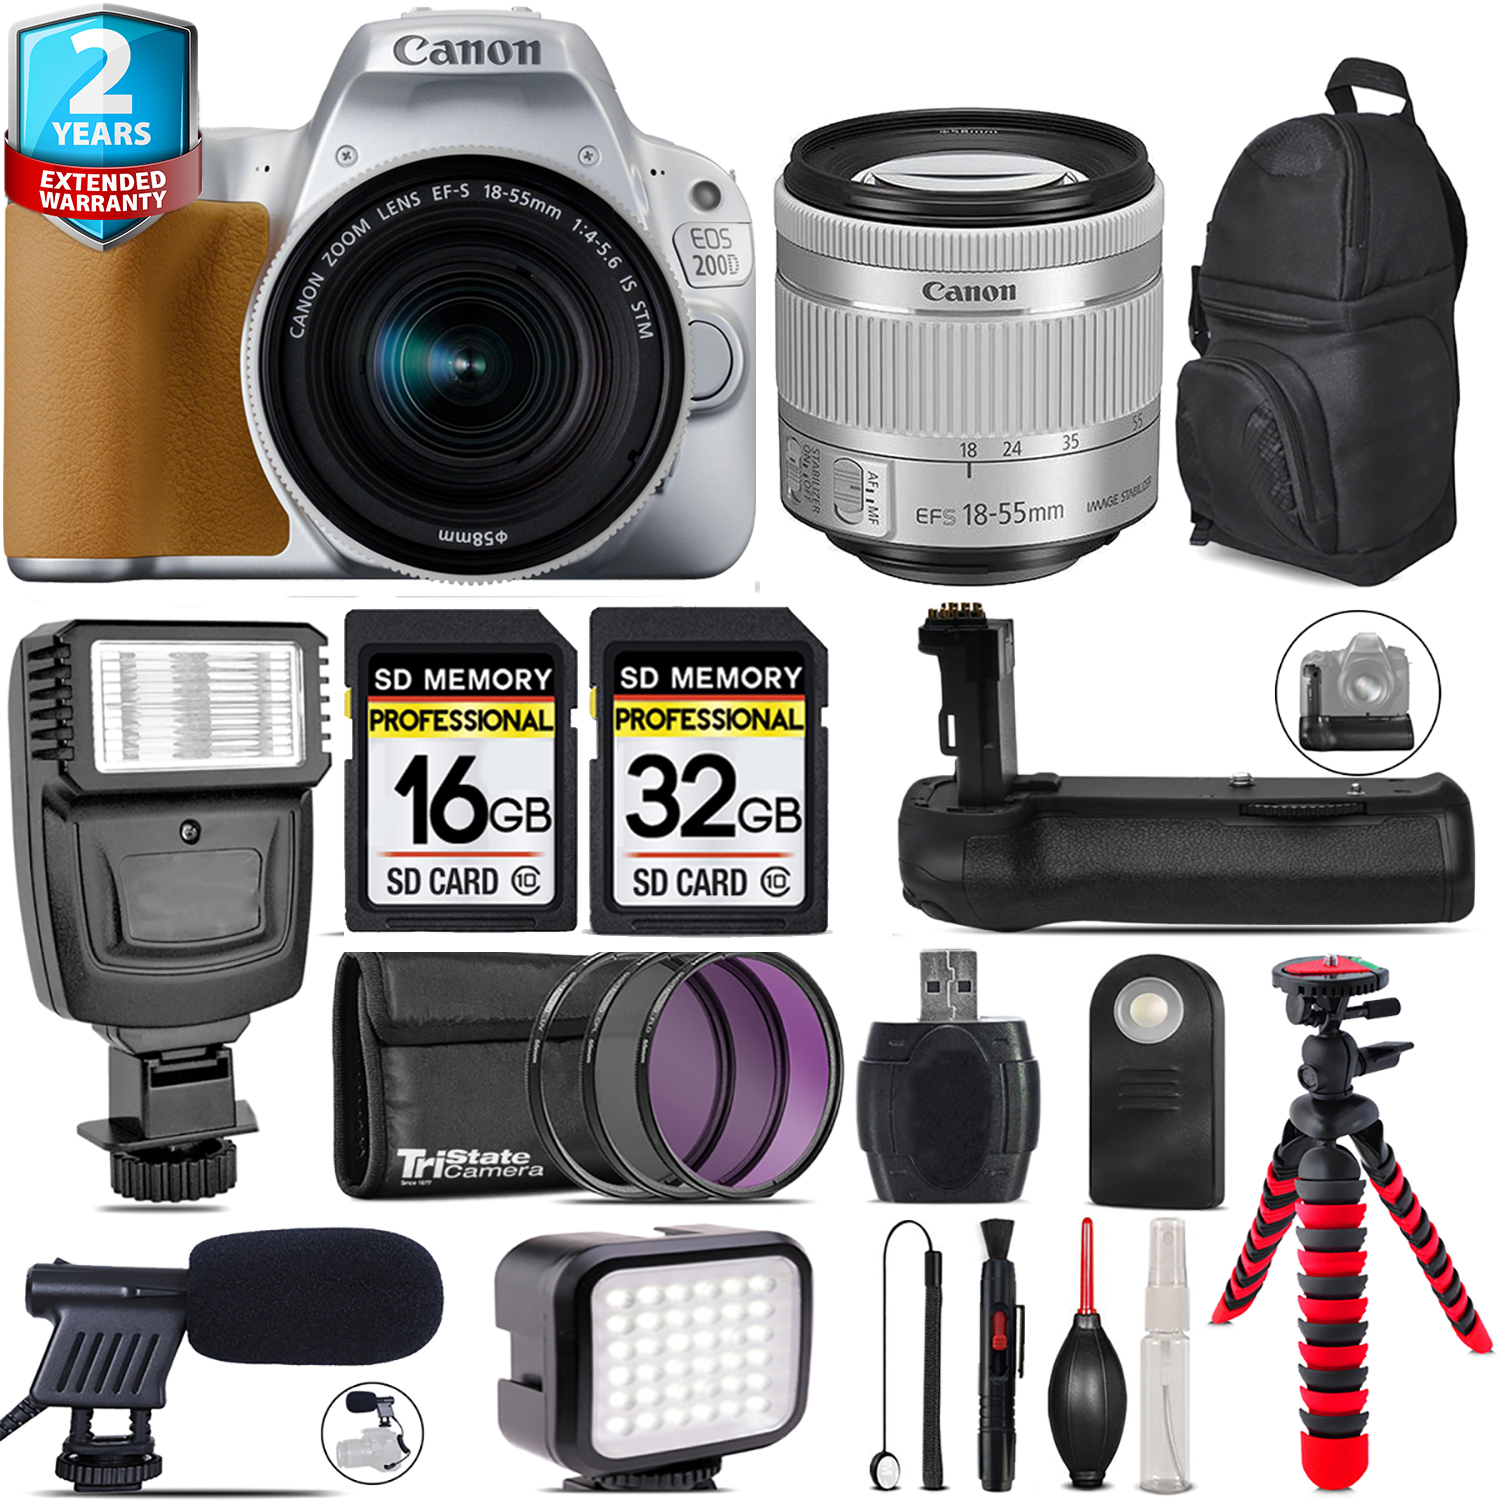 Canon EOS Rebel 200D Camera (Silver) + 18-55mm IS STM + LED Kit + Mic + 48GB *FREE SHIPPING*